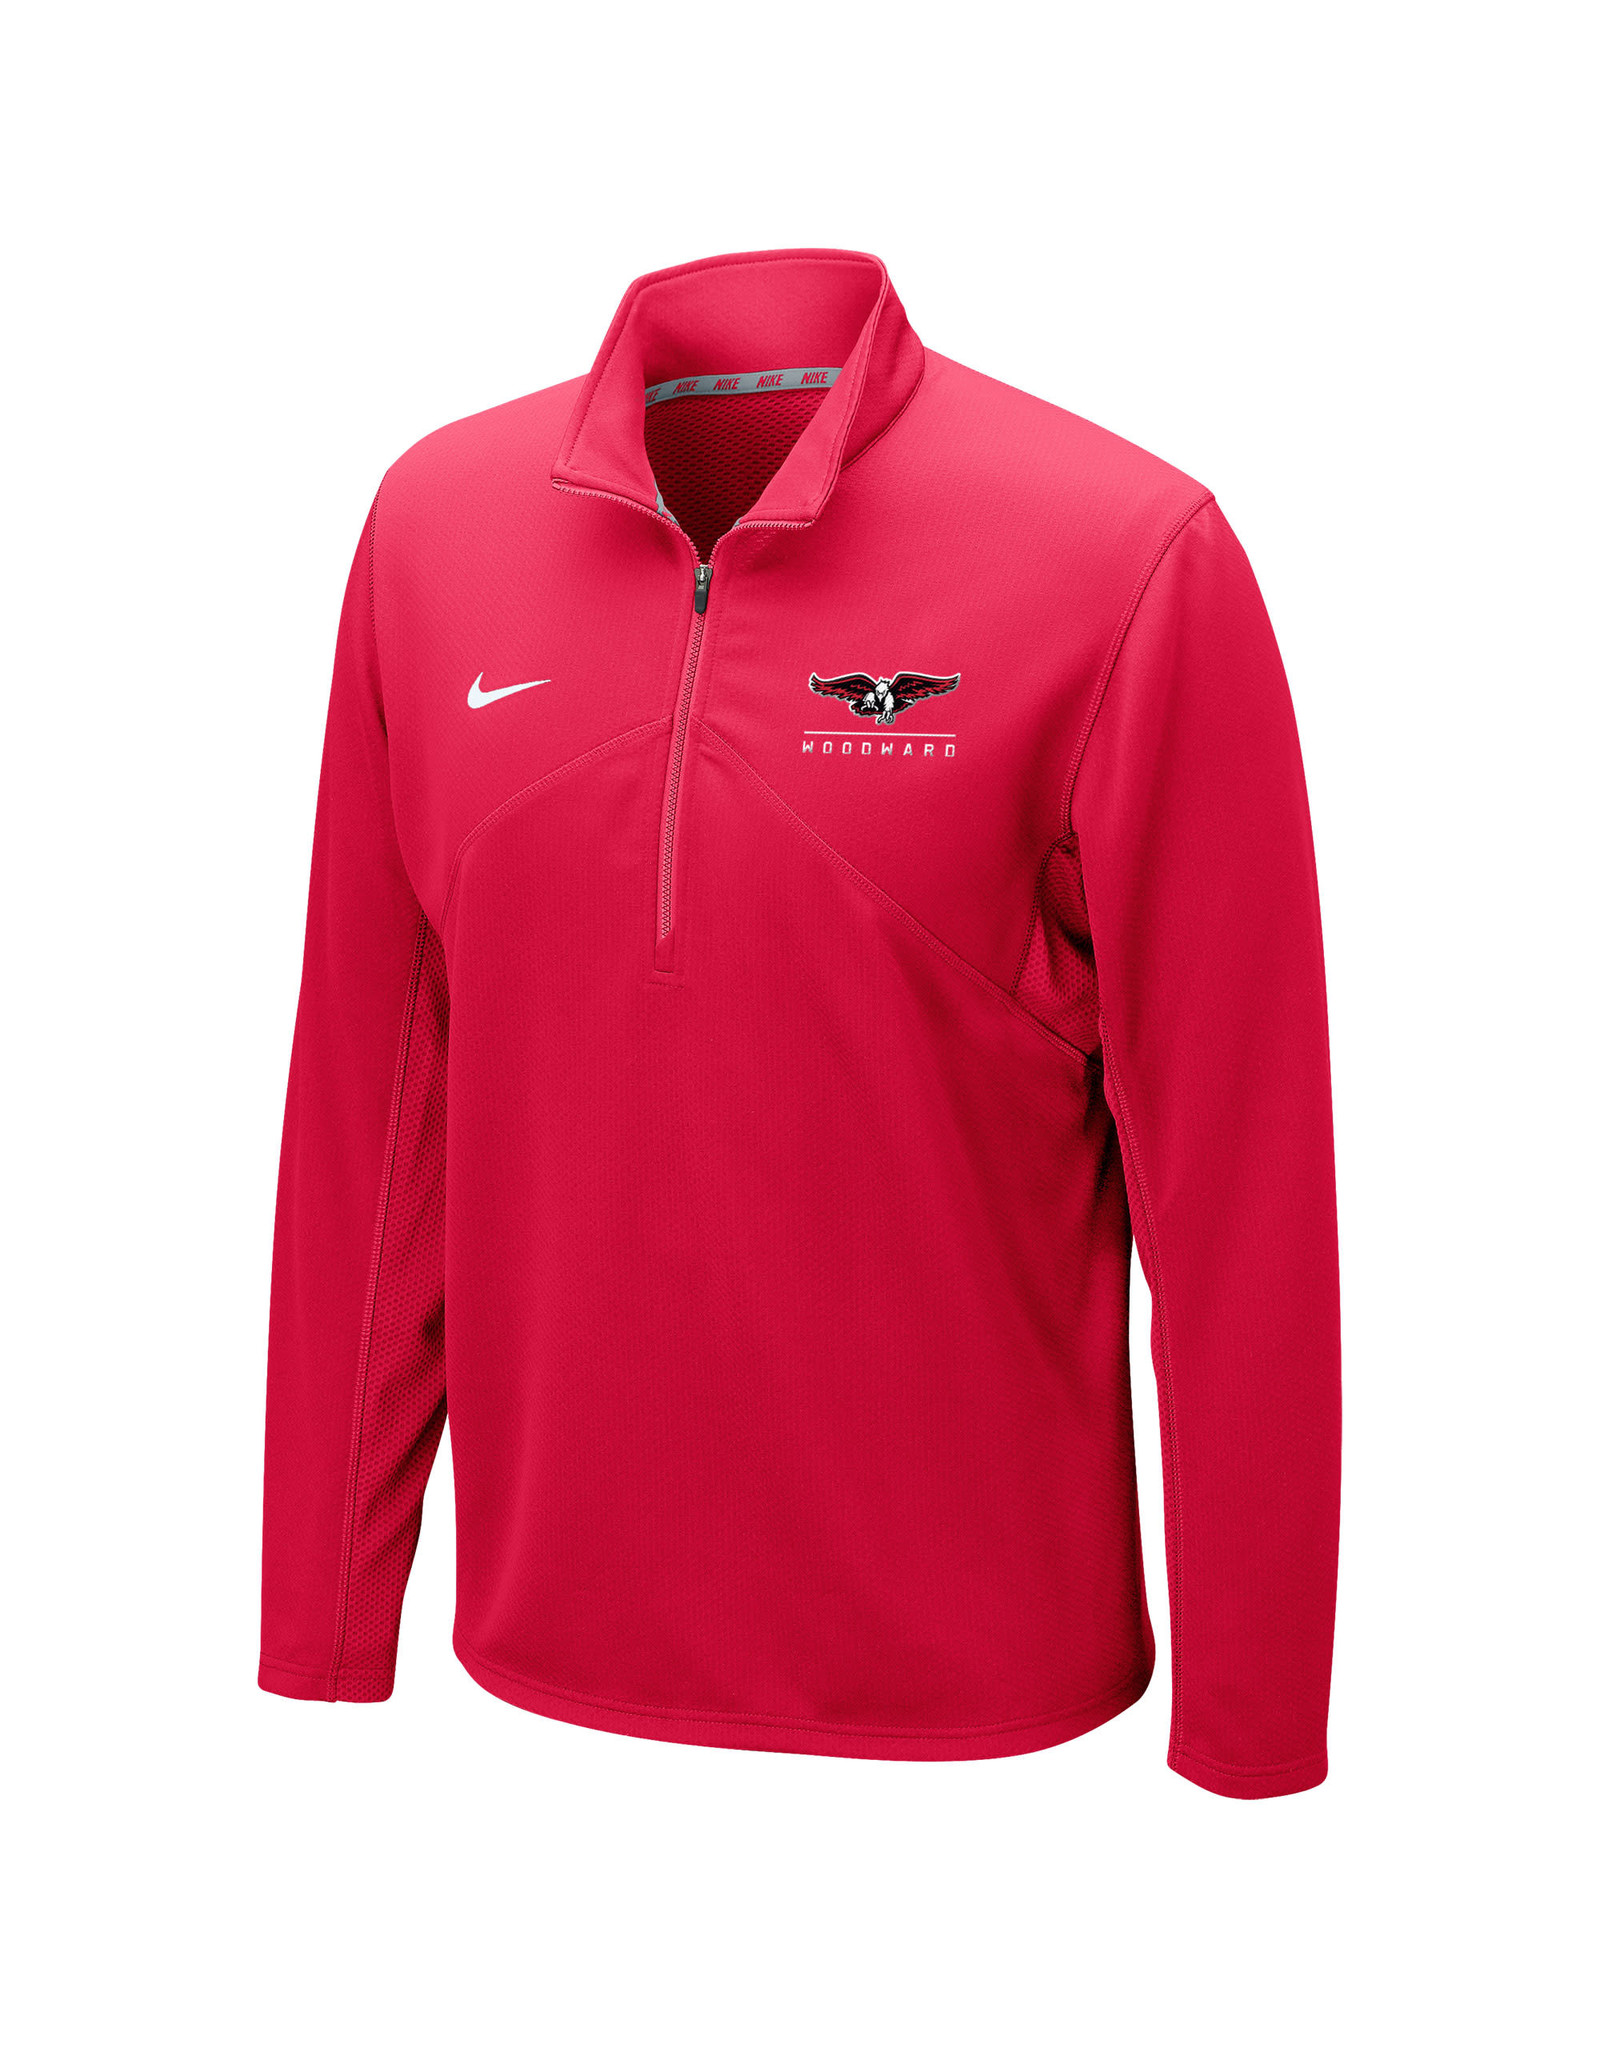 NIKE Dri-Fit Training 1/4 Zip Pullover in Red (Adult Small)